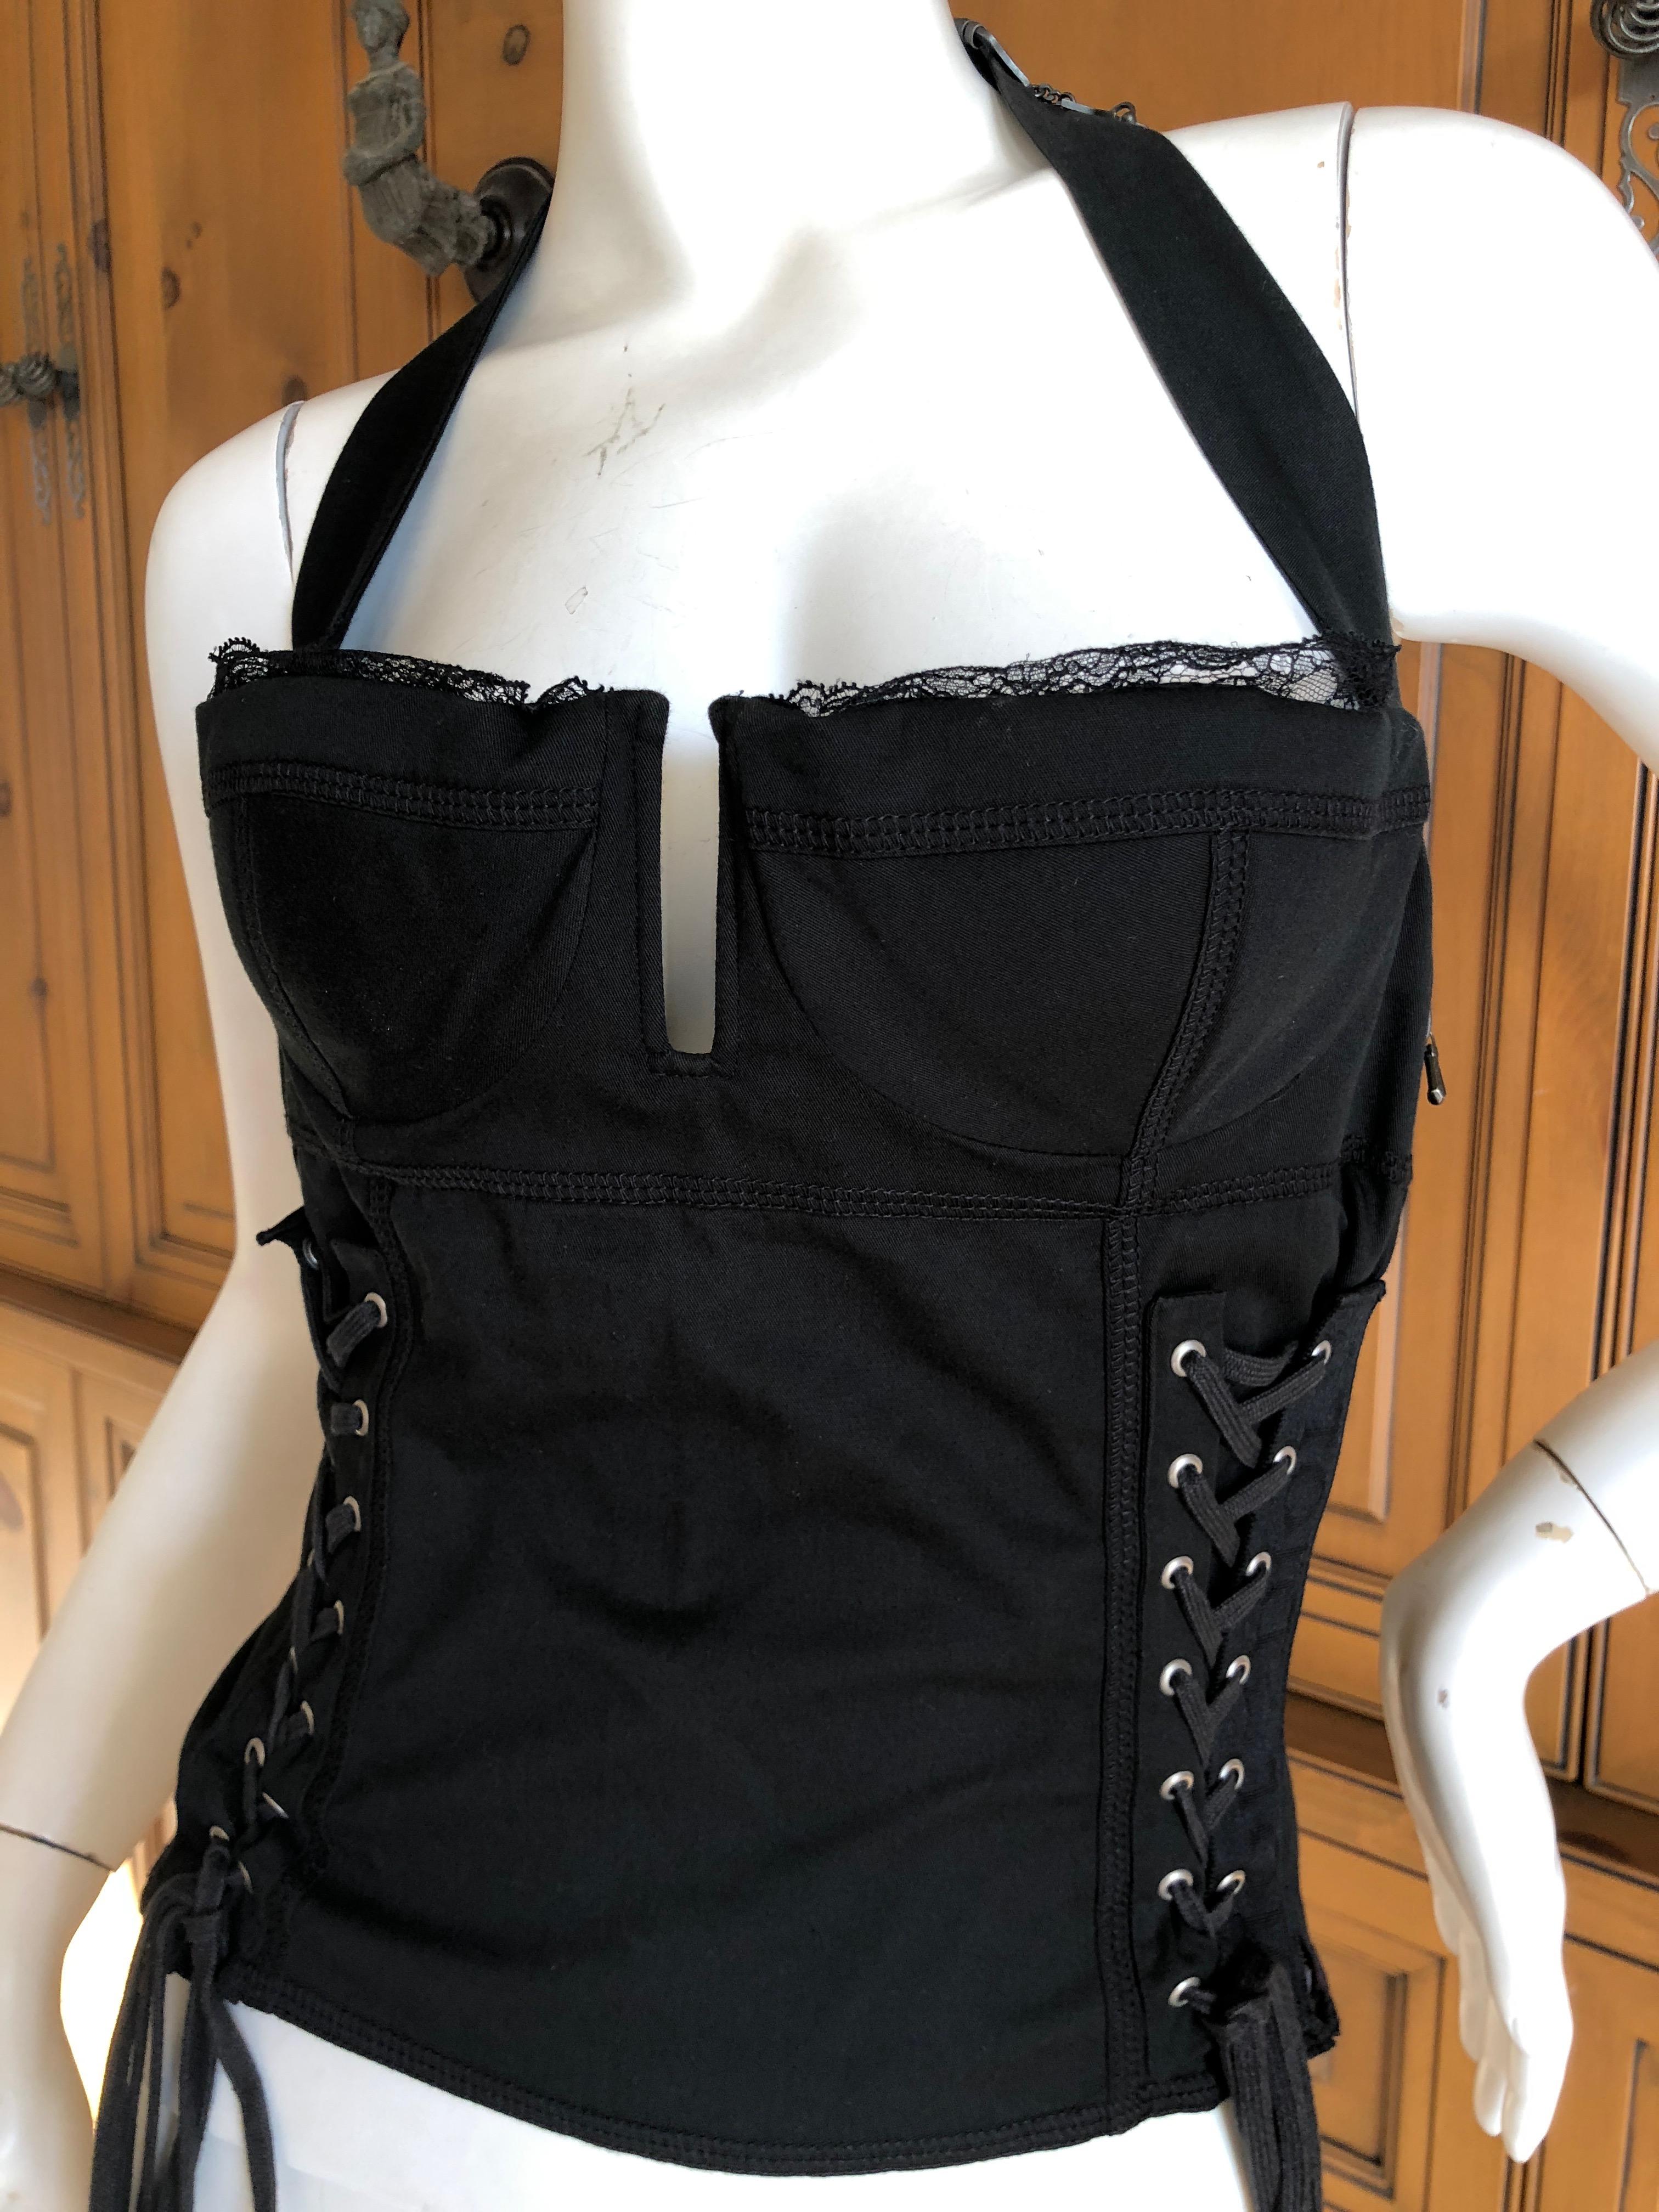 Christian Dior by John Galliano Vintage Black Lace Trimmed Corset In Excellent Condition For Sale In Cloverdale, CA